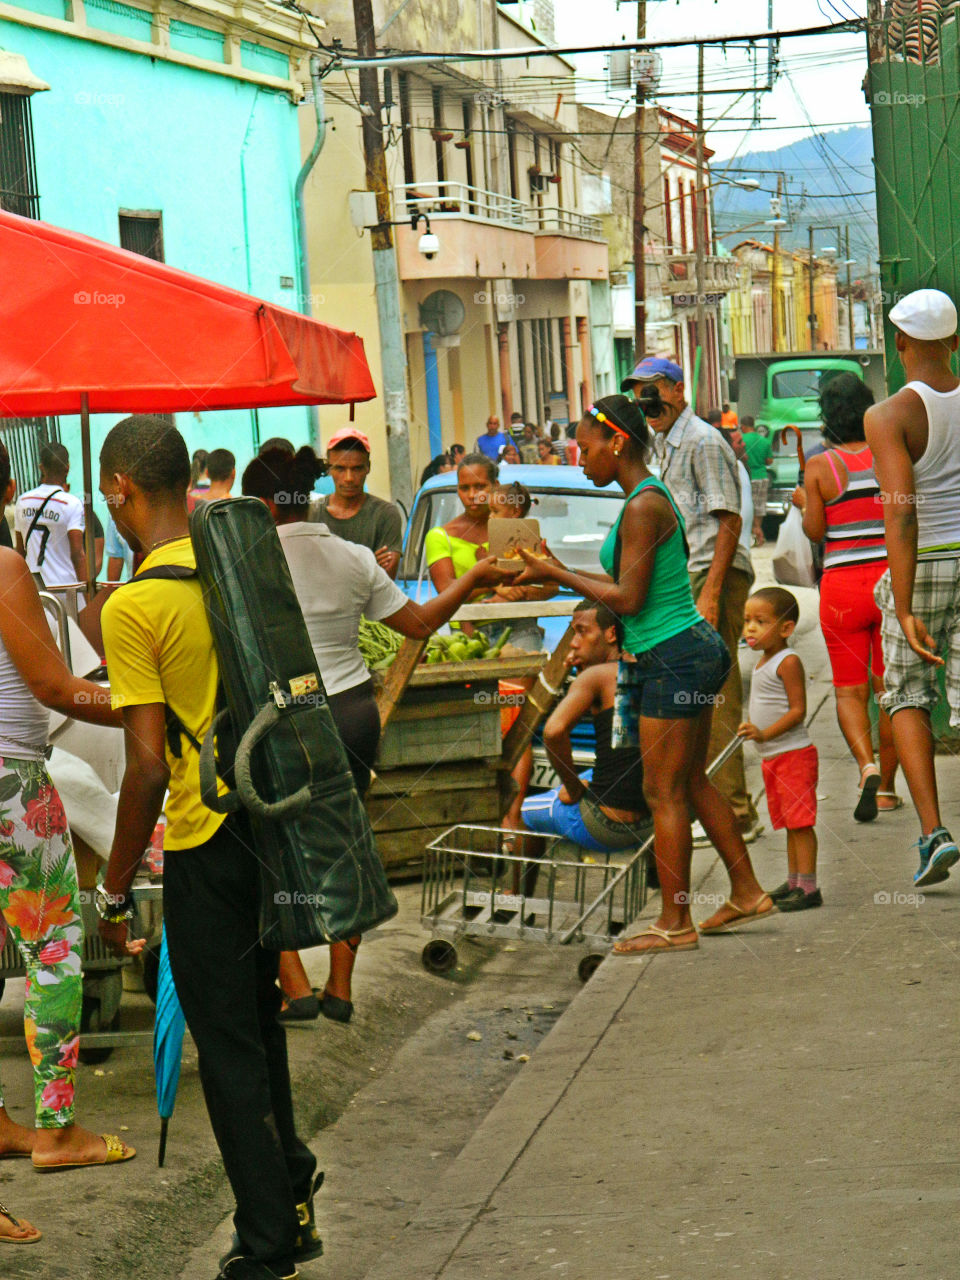 Cuban Street Market. This is a photo of one of many street markets in Santiago de Cuba. Anything from food to music is sold on narrow streets